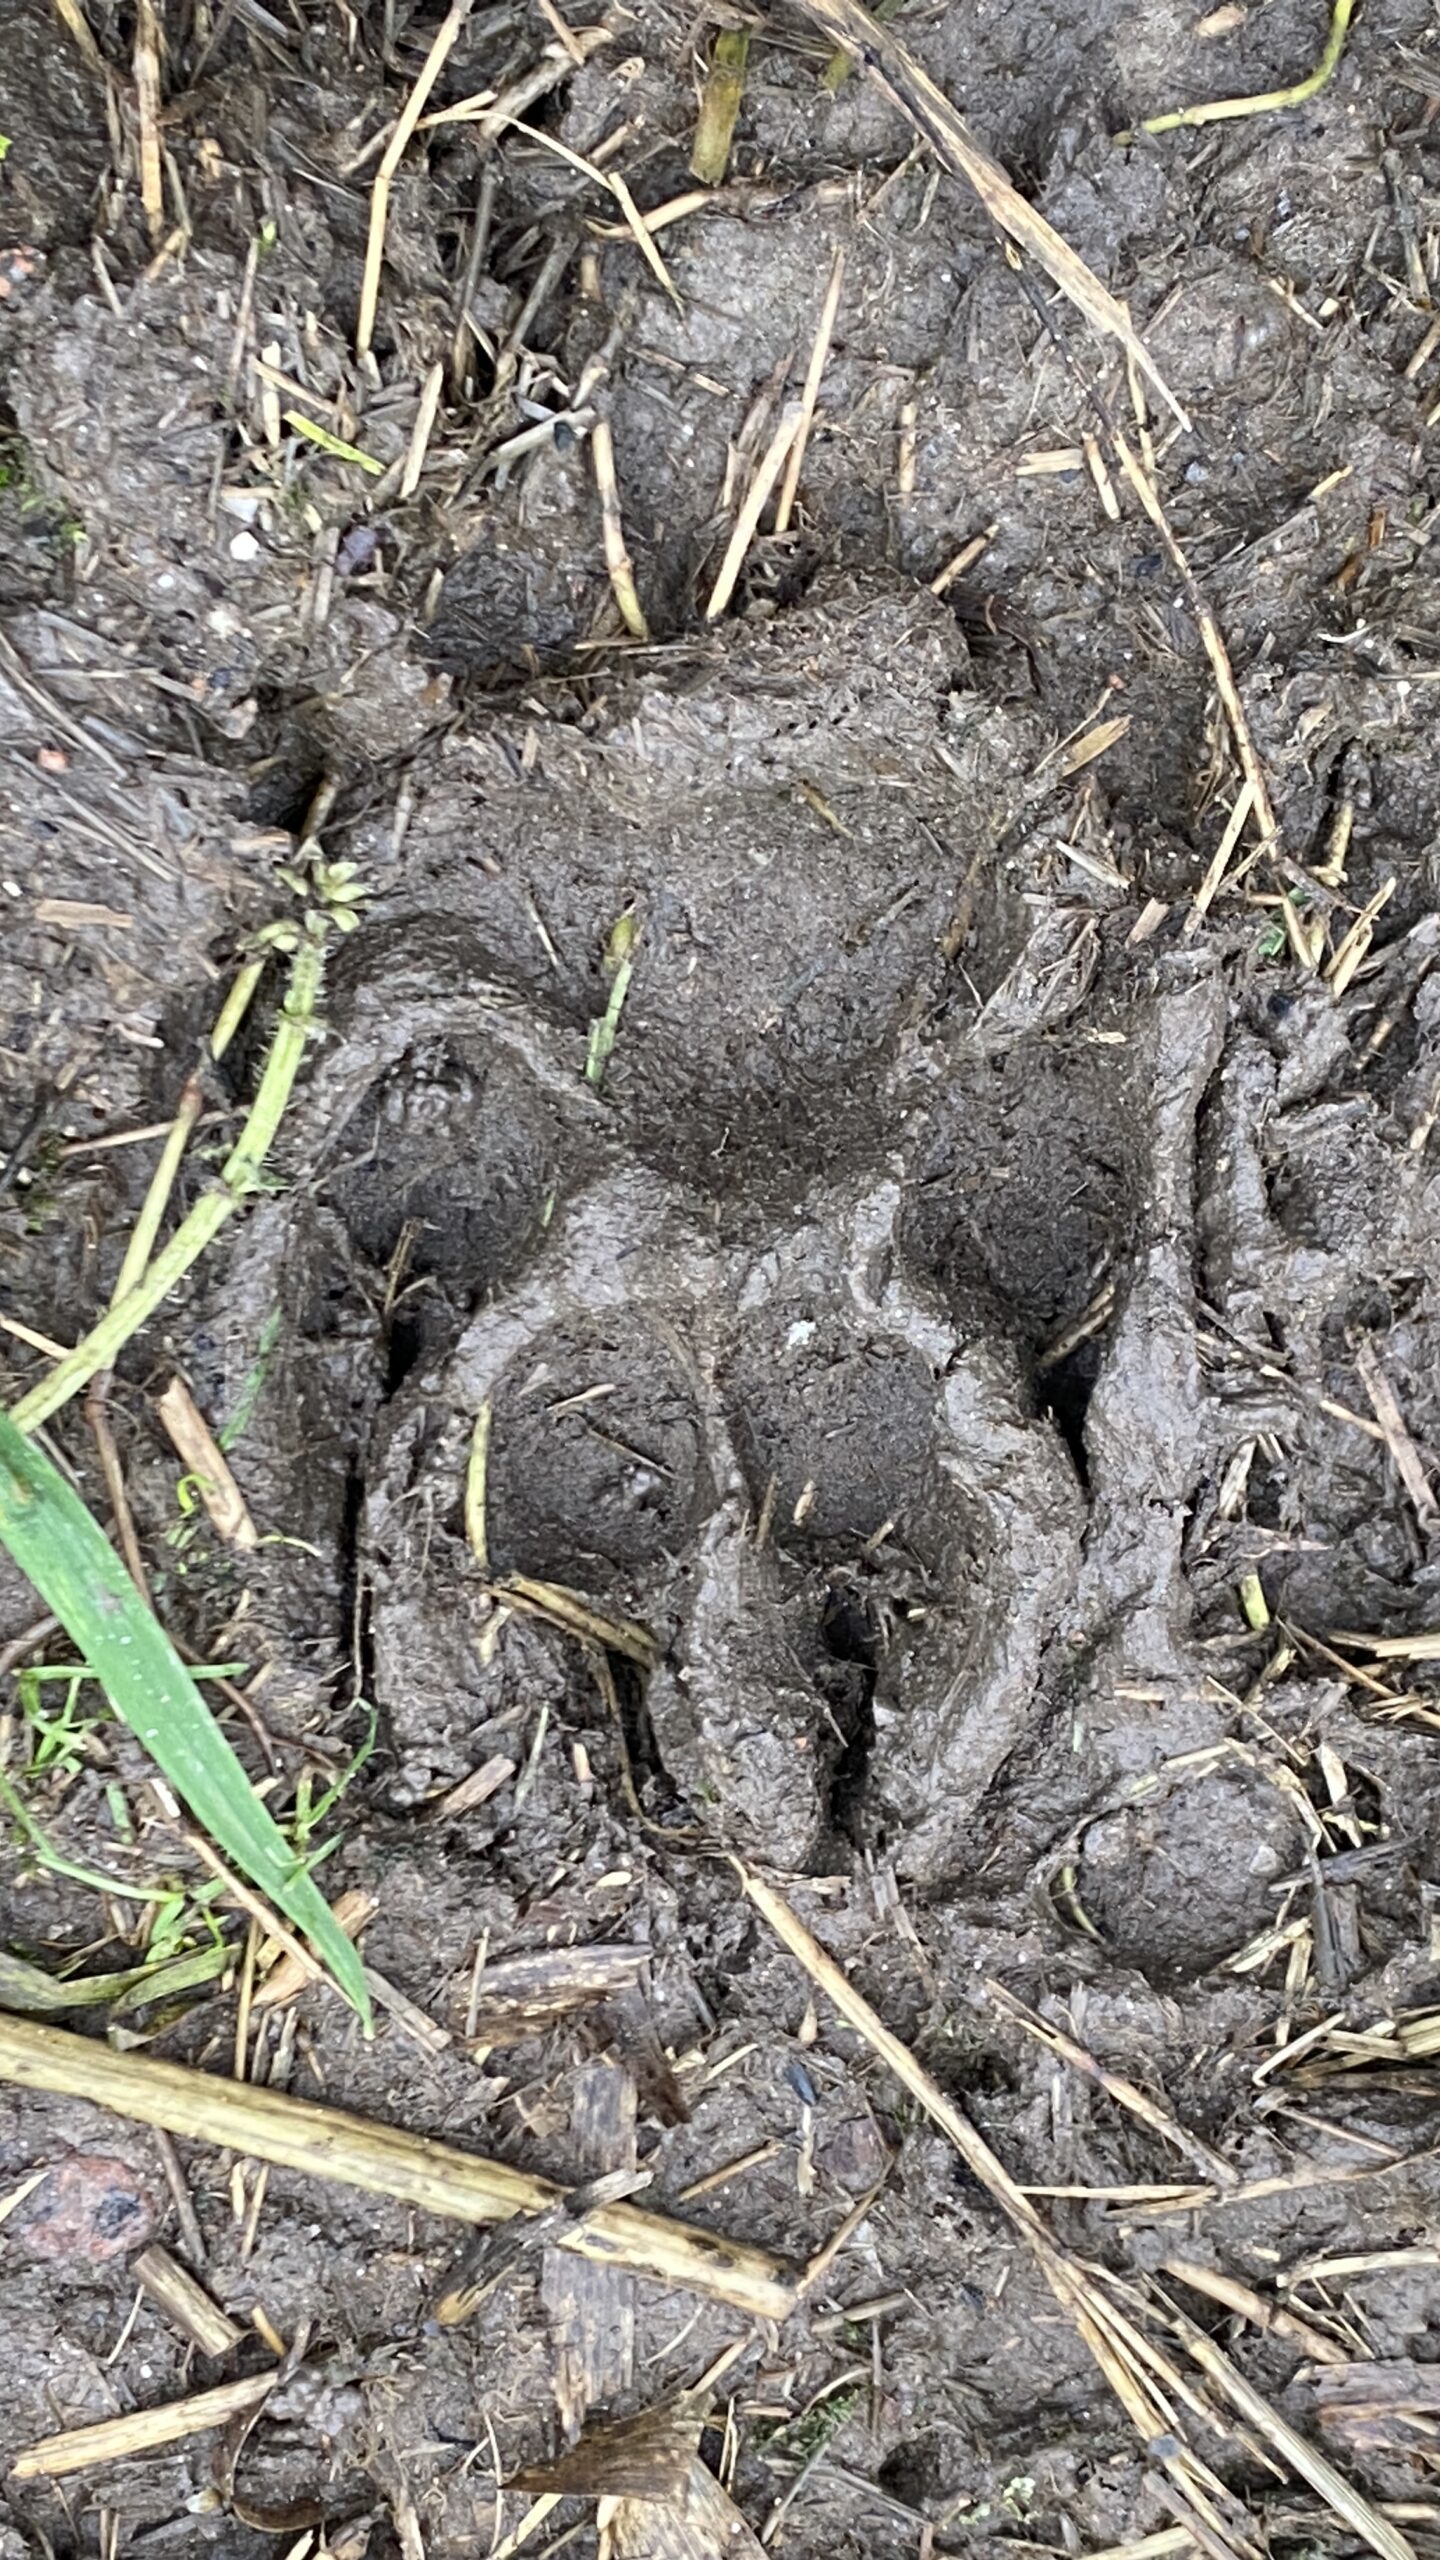 Footprints found at Ince Marshes. Images: Puma Watch North Wales